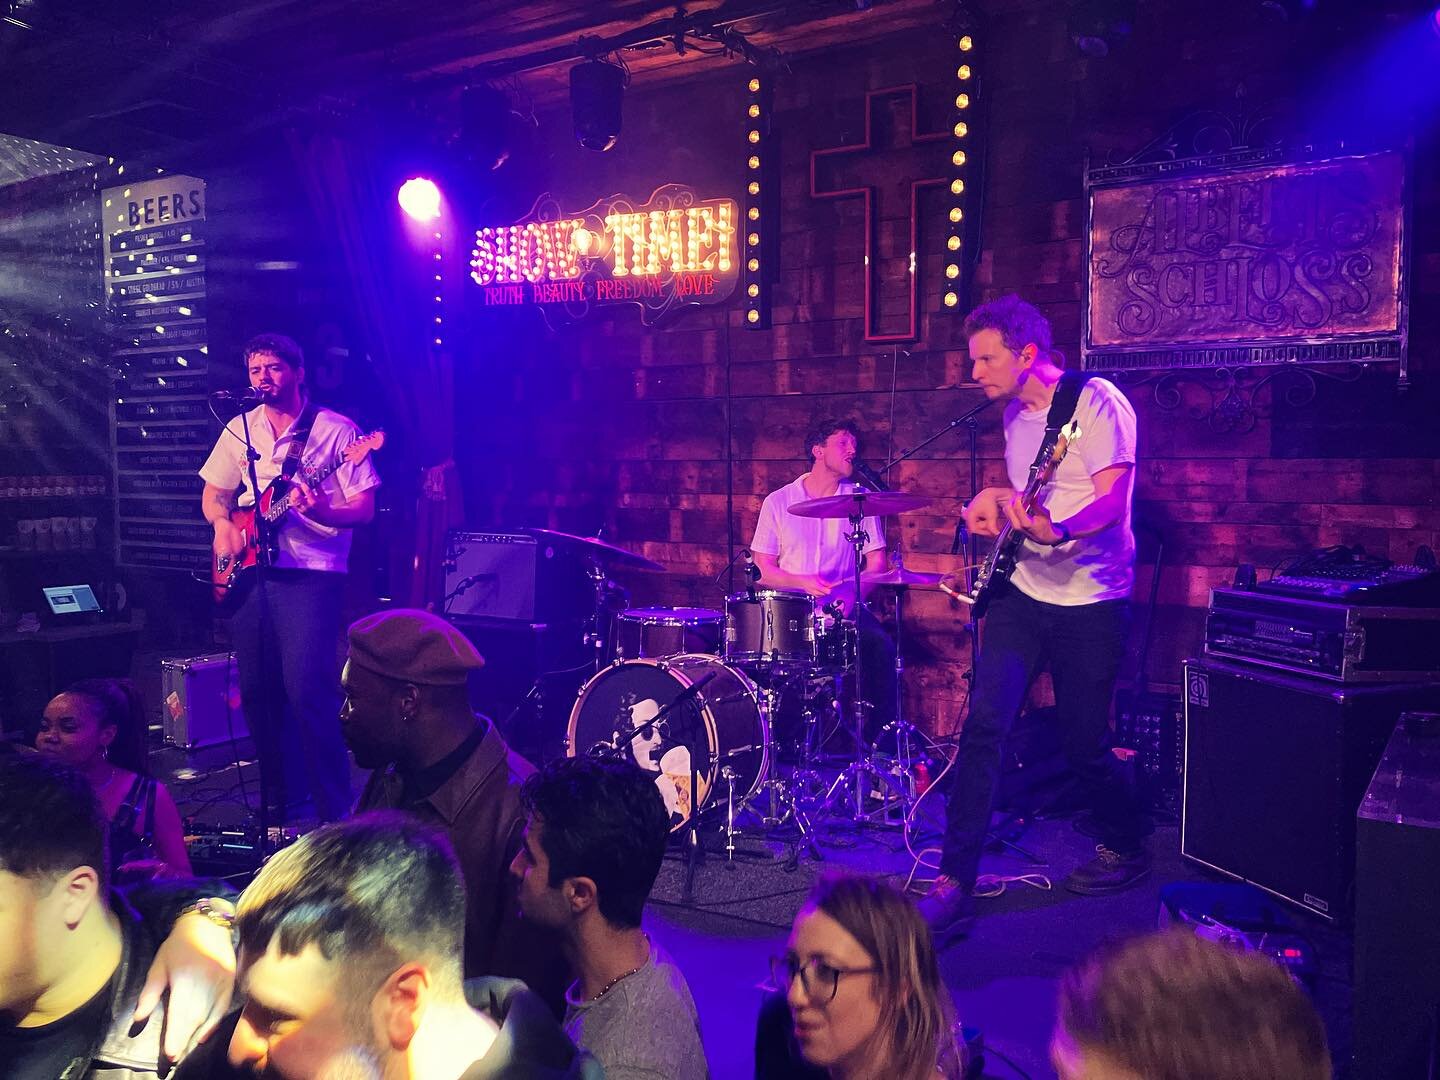 We rocked @albertsschloss last night as a trio and was awesome fun! (We didn&rsquo;t plan to all arrive wearing white, just a coincidence 😂) 
We&rsquo;ll keep you posted for when the next one is!
#band #coverband #coversband #manchester #rock #indie